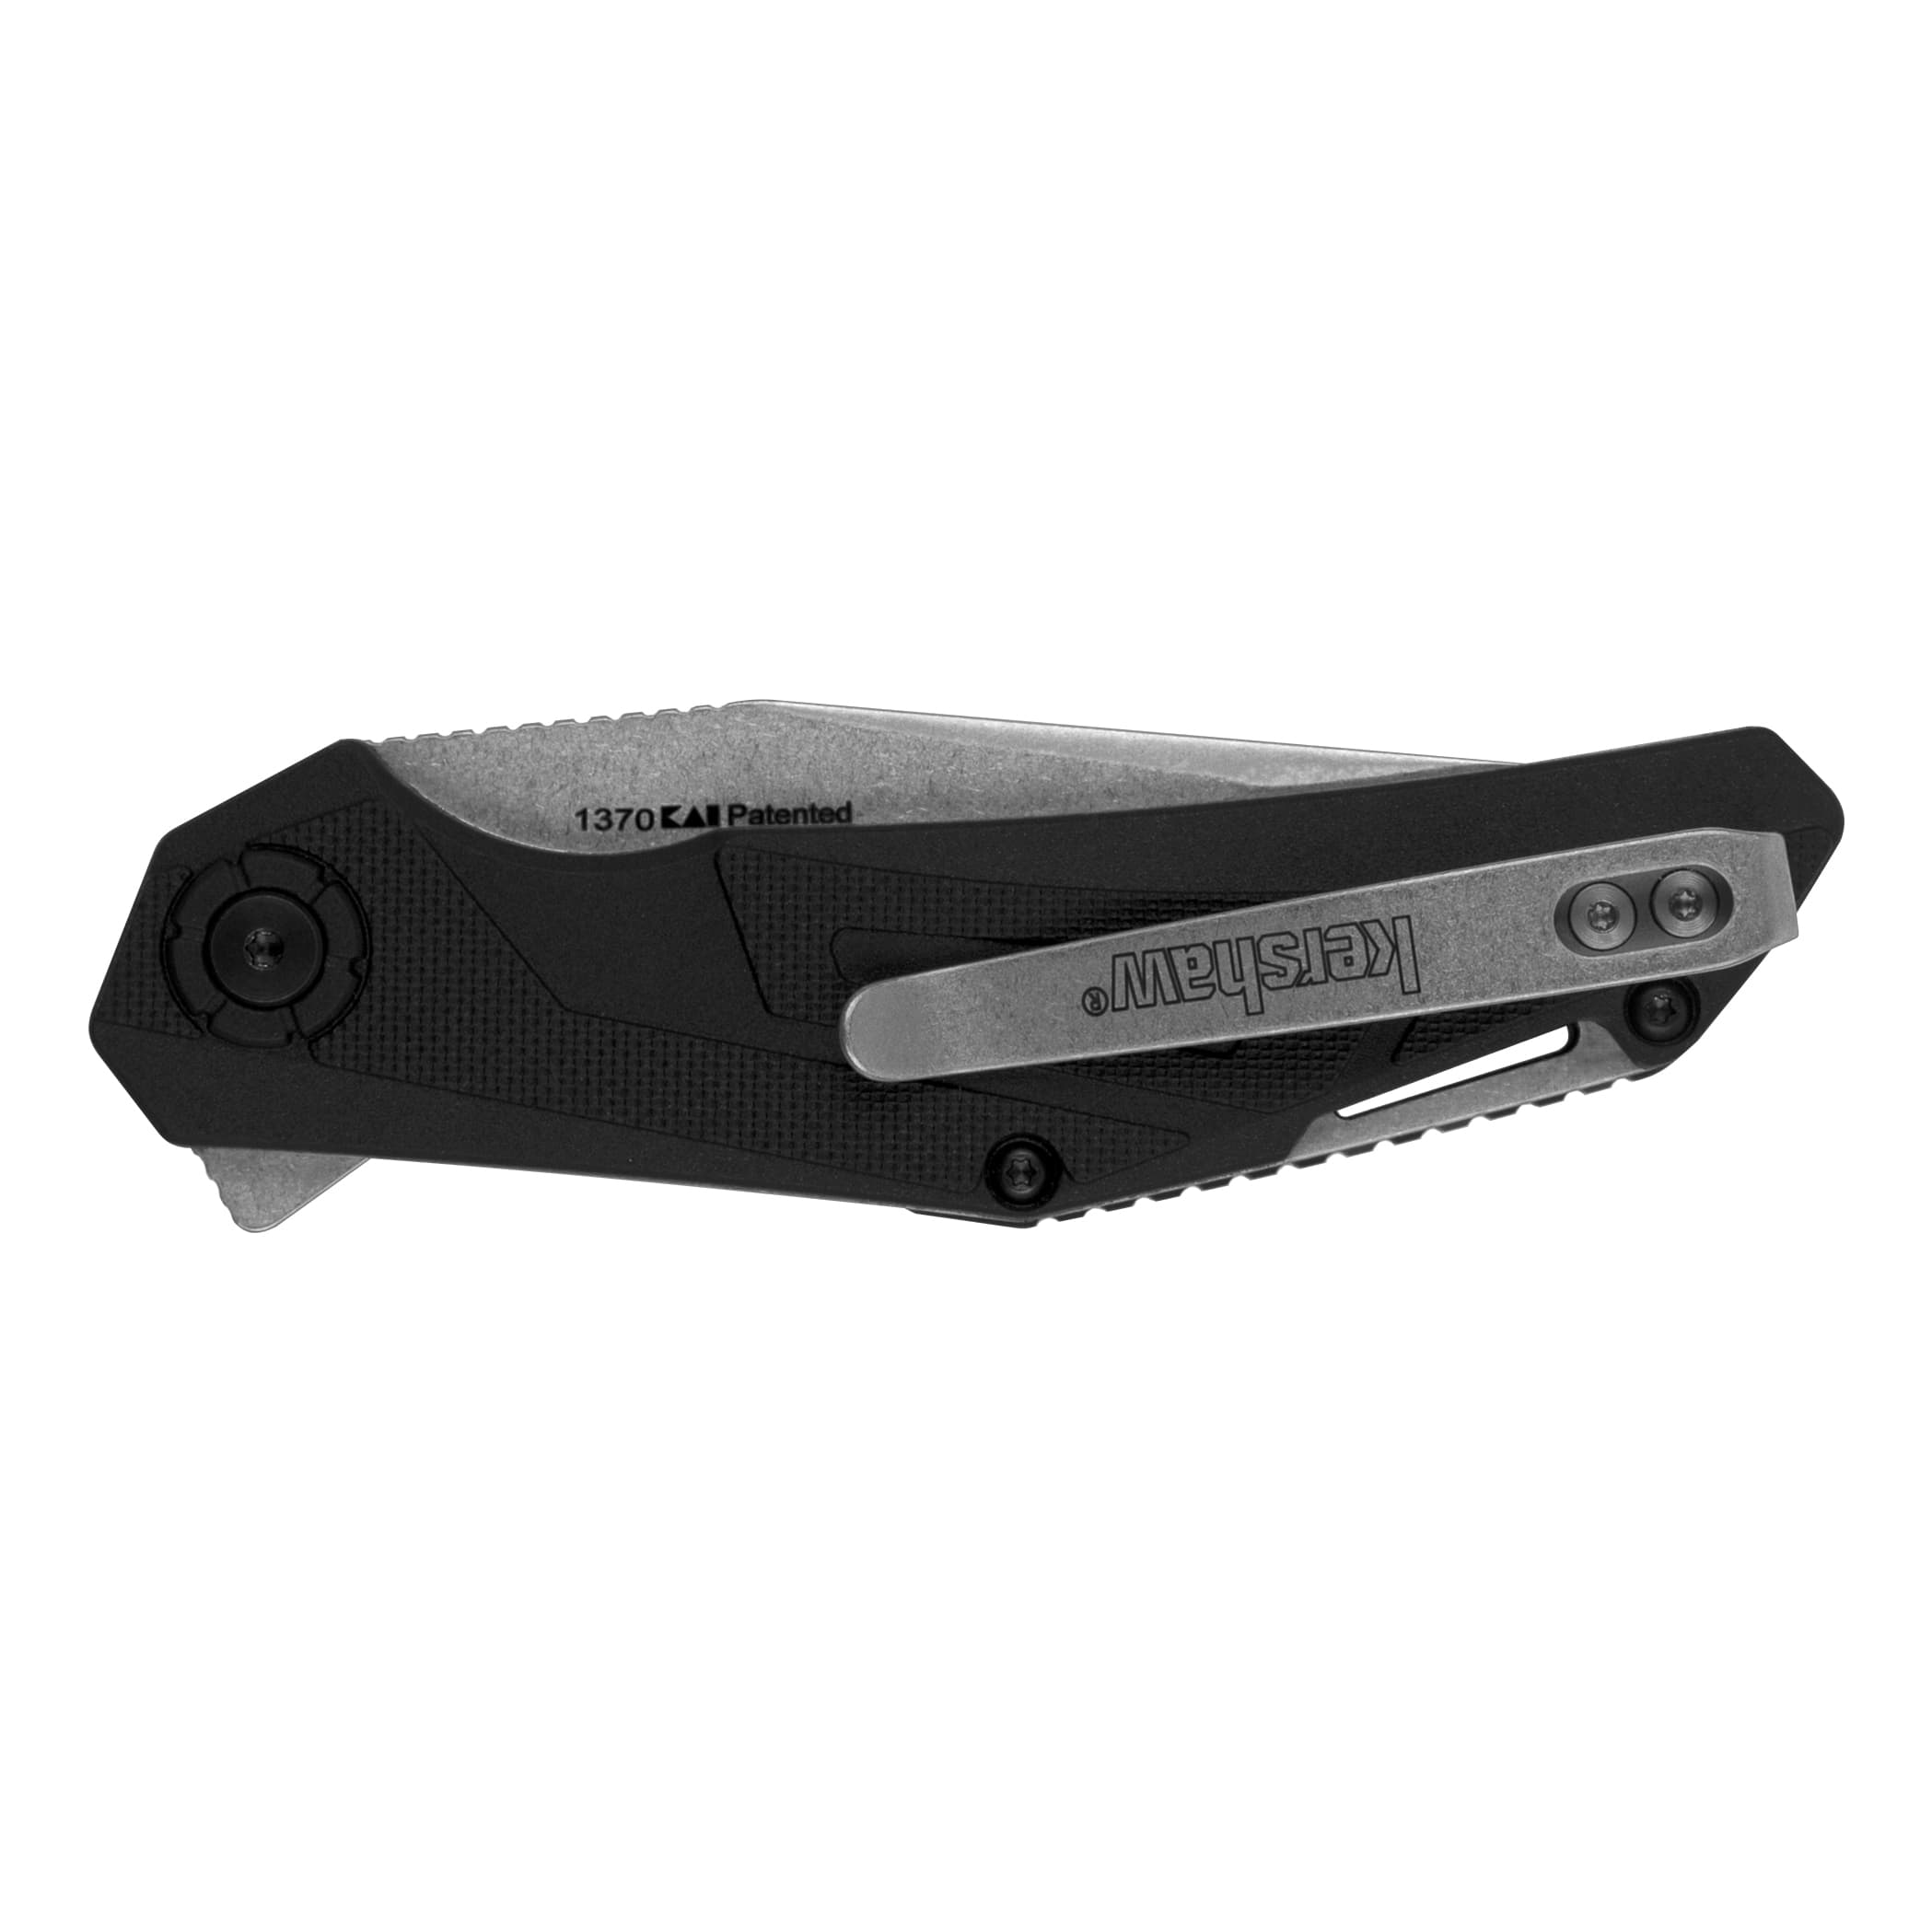 Kershaw® Camshaft 1370 3" Assisted Open Knife - closed